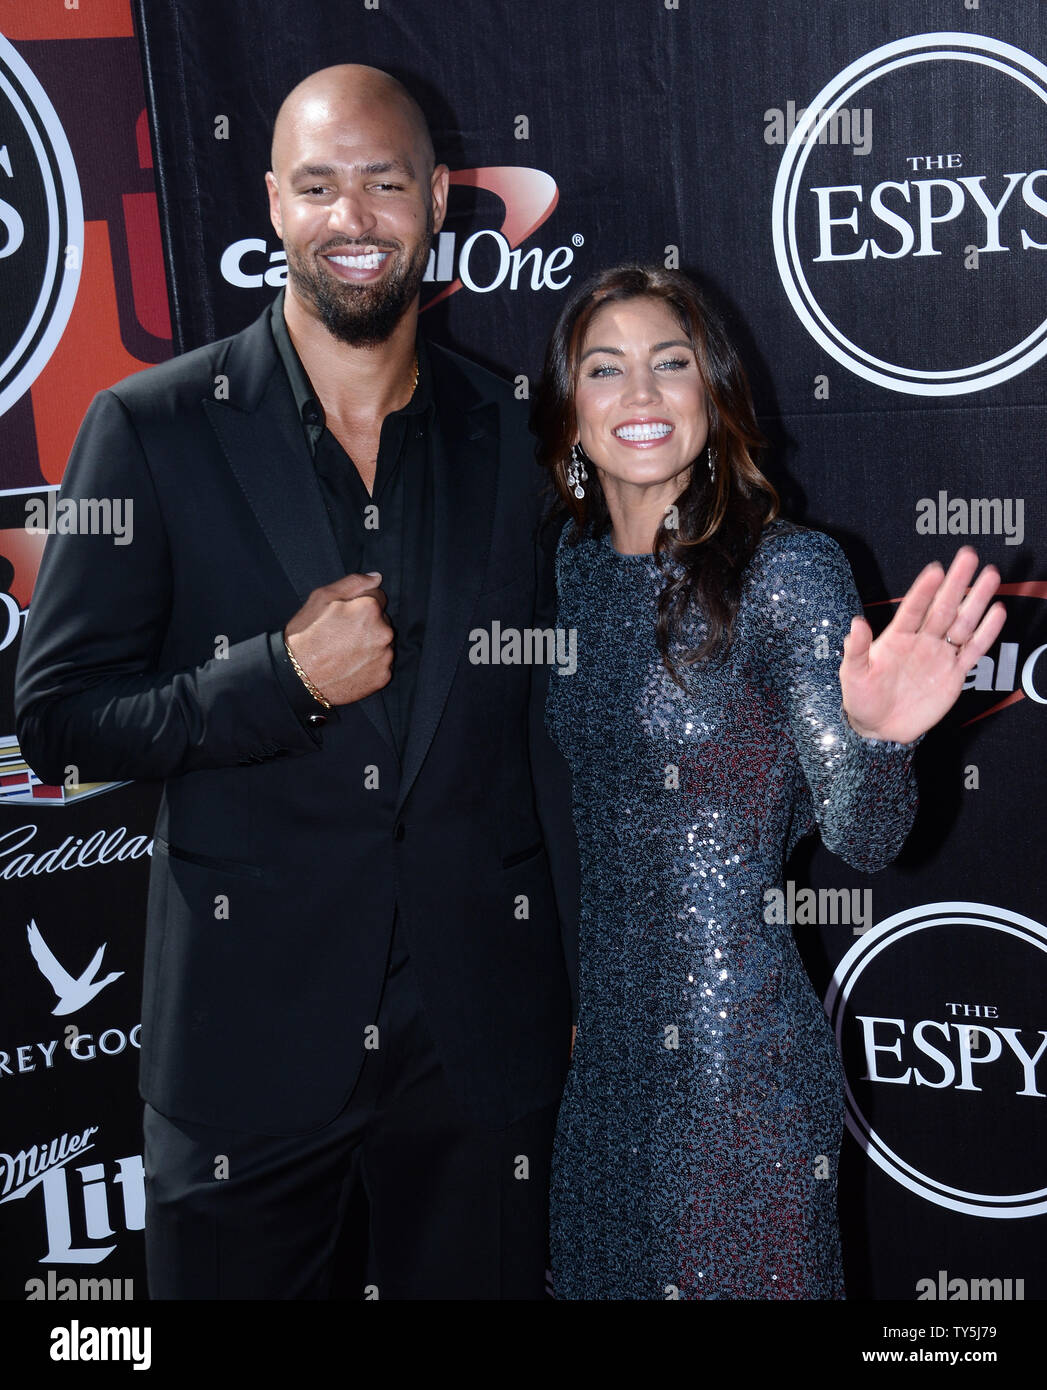 U.S. professional soccer player Hope Solo and Jerramy Stevens attend the ESPY Awards at Microsoft Theater in Los Angeles on July 15, 2015. Photo by Jim Ruymen/UPI Stock Photo